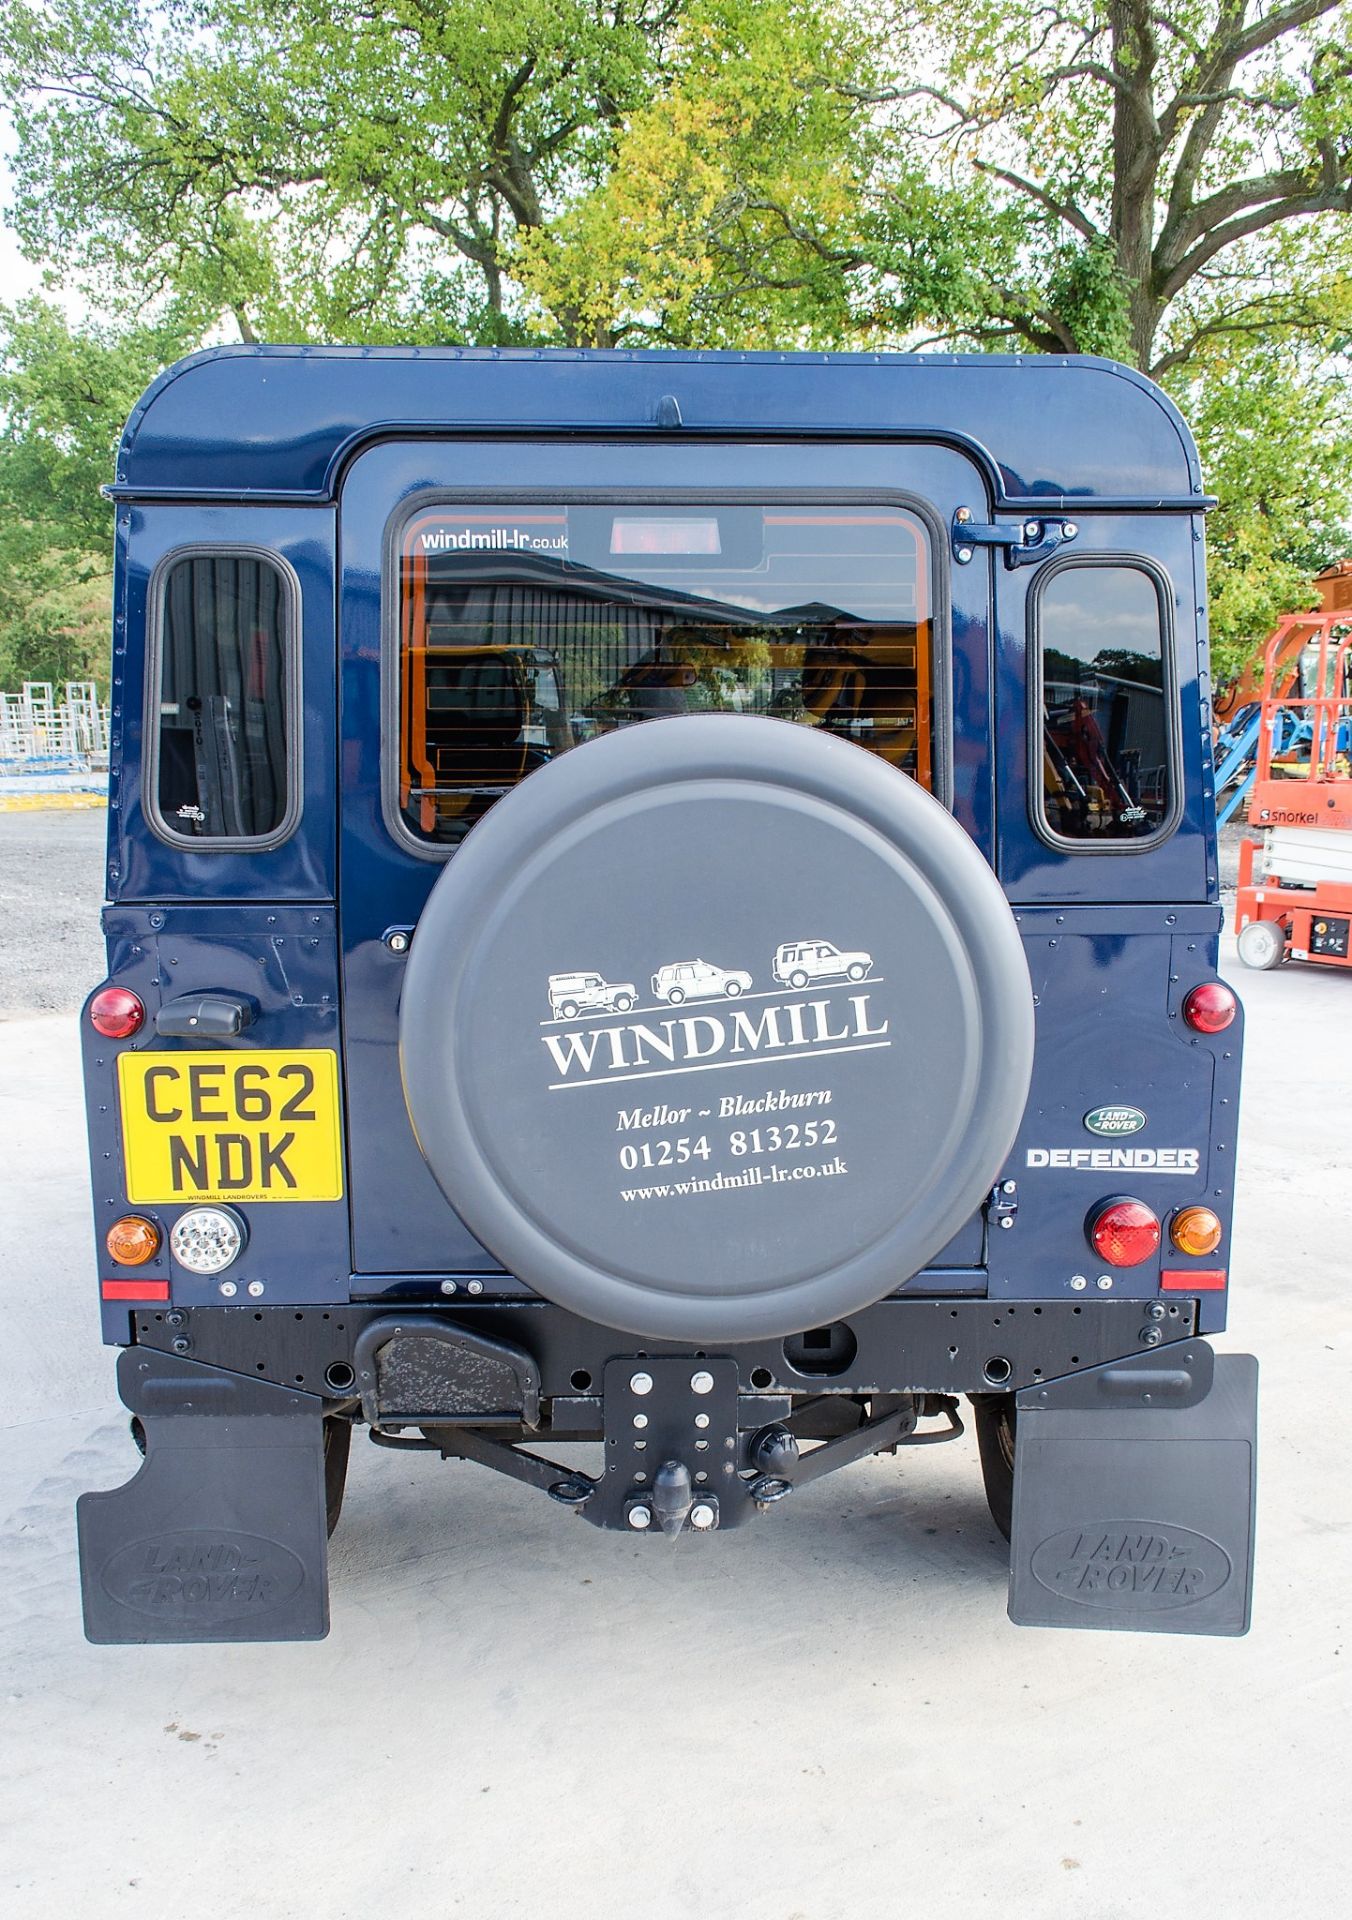 Landrover Defender 90 XS TD 2198cc 4x4 utility vehicle Registration Number: CE62 NDK Date of - Image 6 of 32